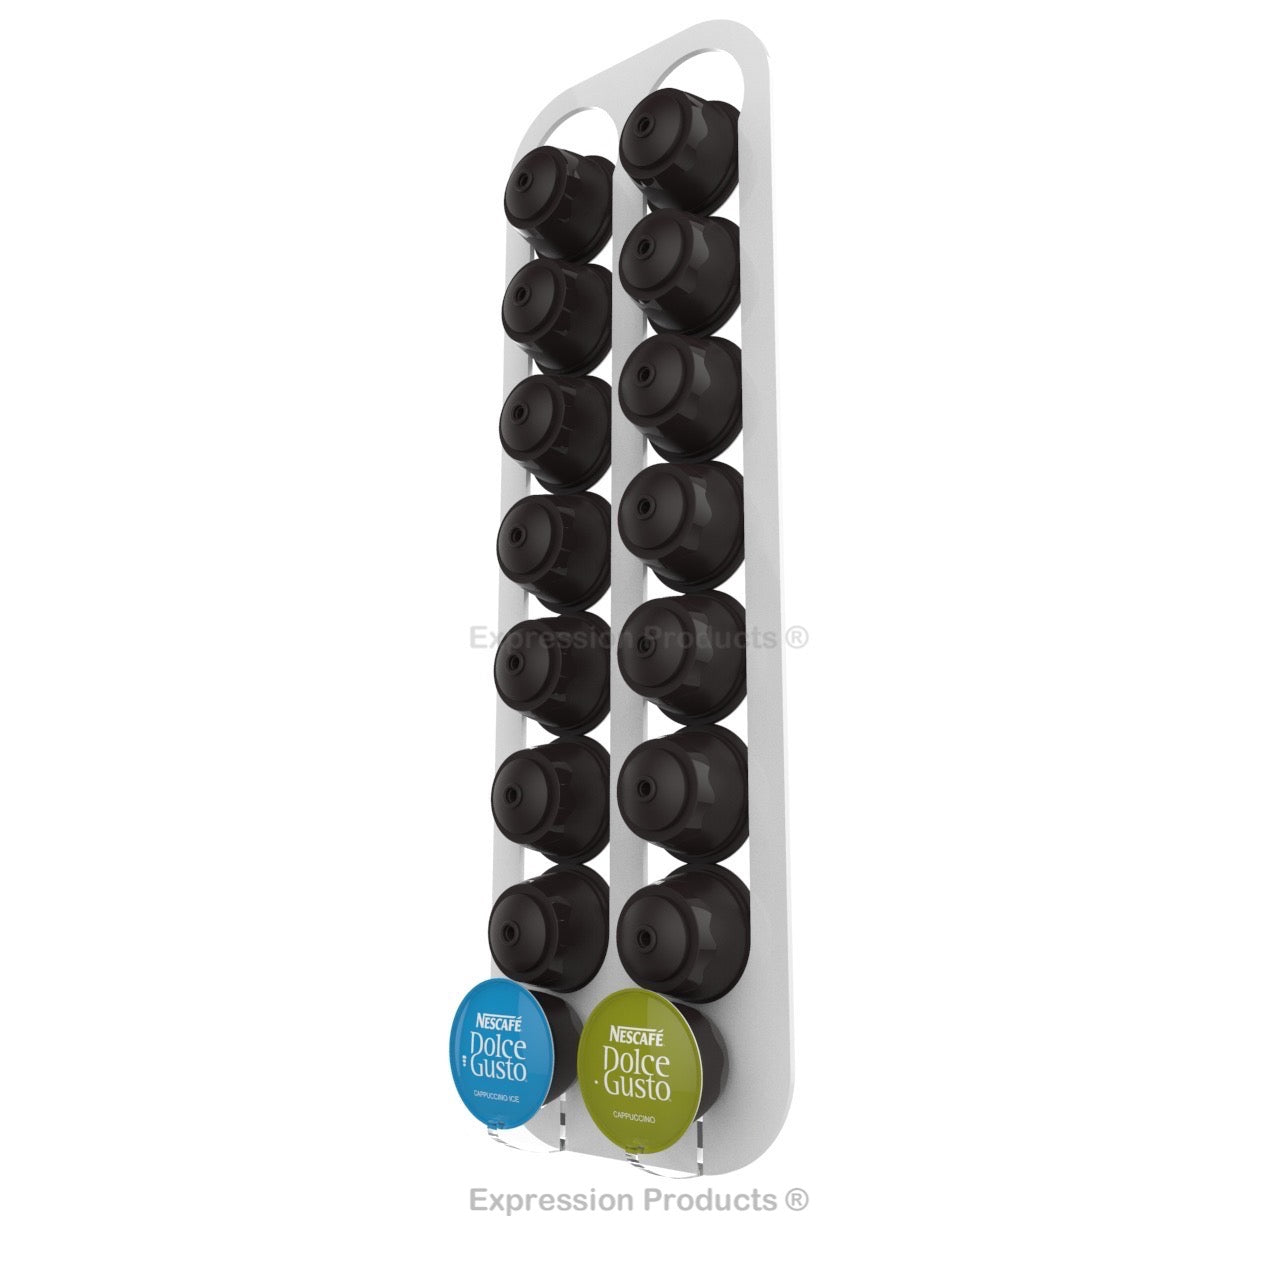 Dolce Gusto Coffee Pod Holder, Wall Mounted.  Shown in White Holding 16 Pods